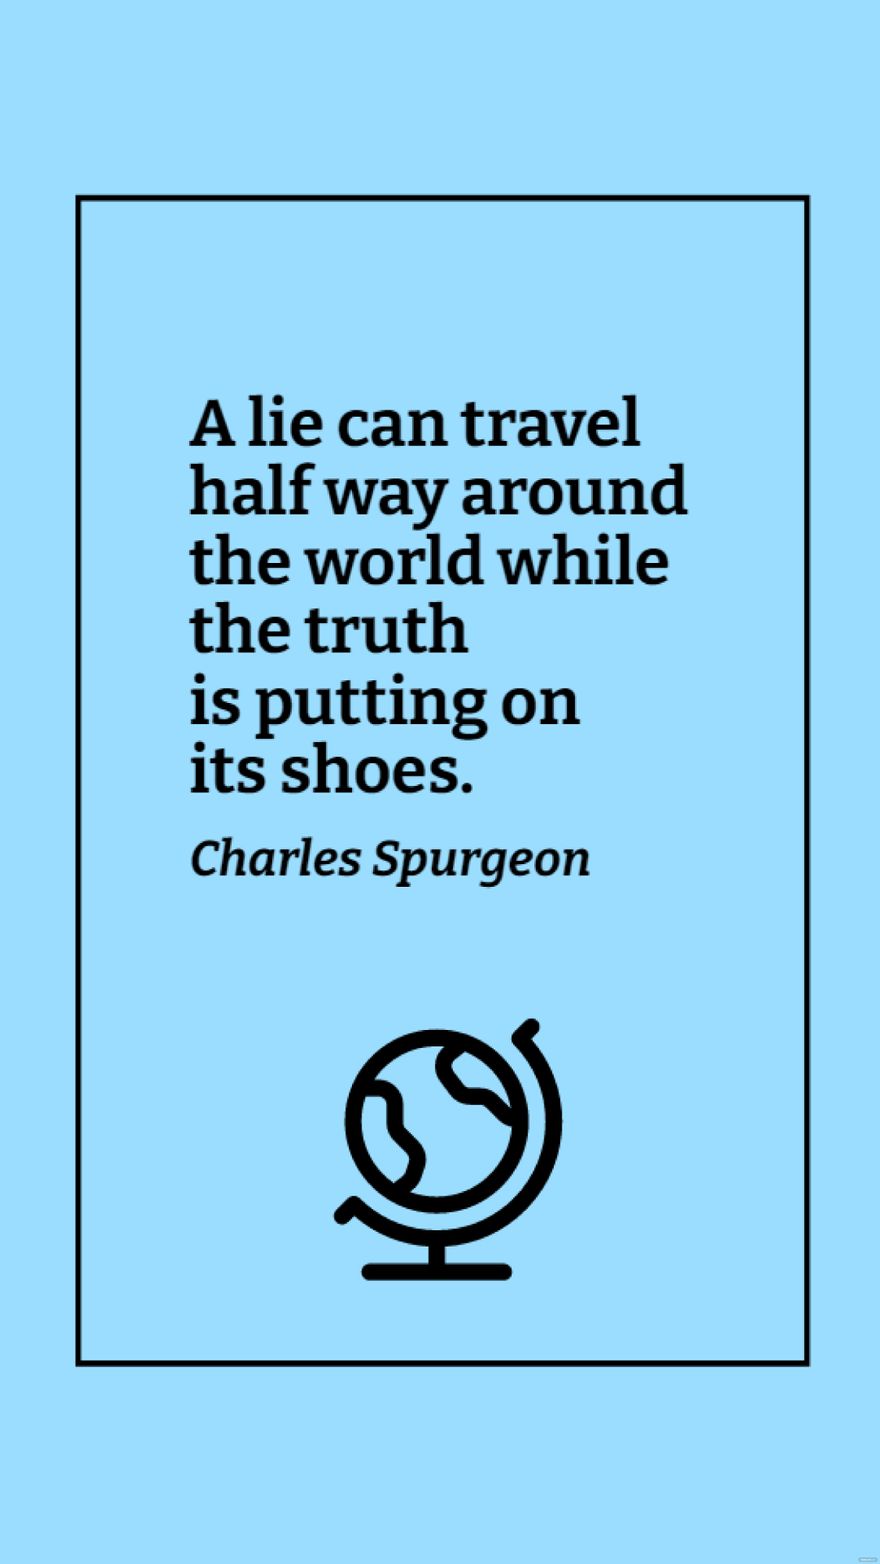 Charles Spurgeon - A lie can travel half way around the world while the truth is putting on its shoes.